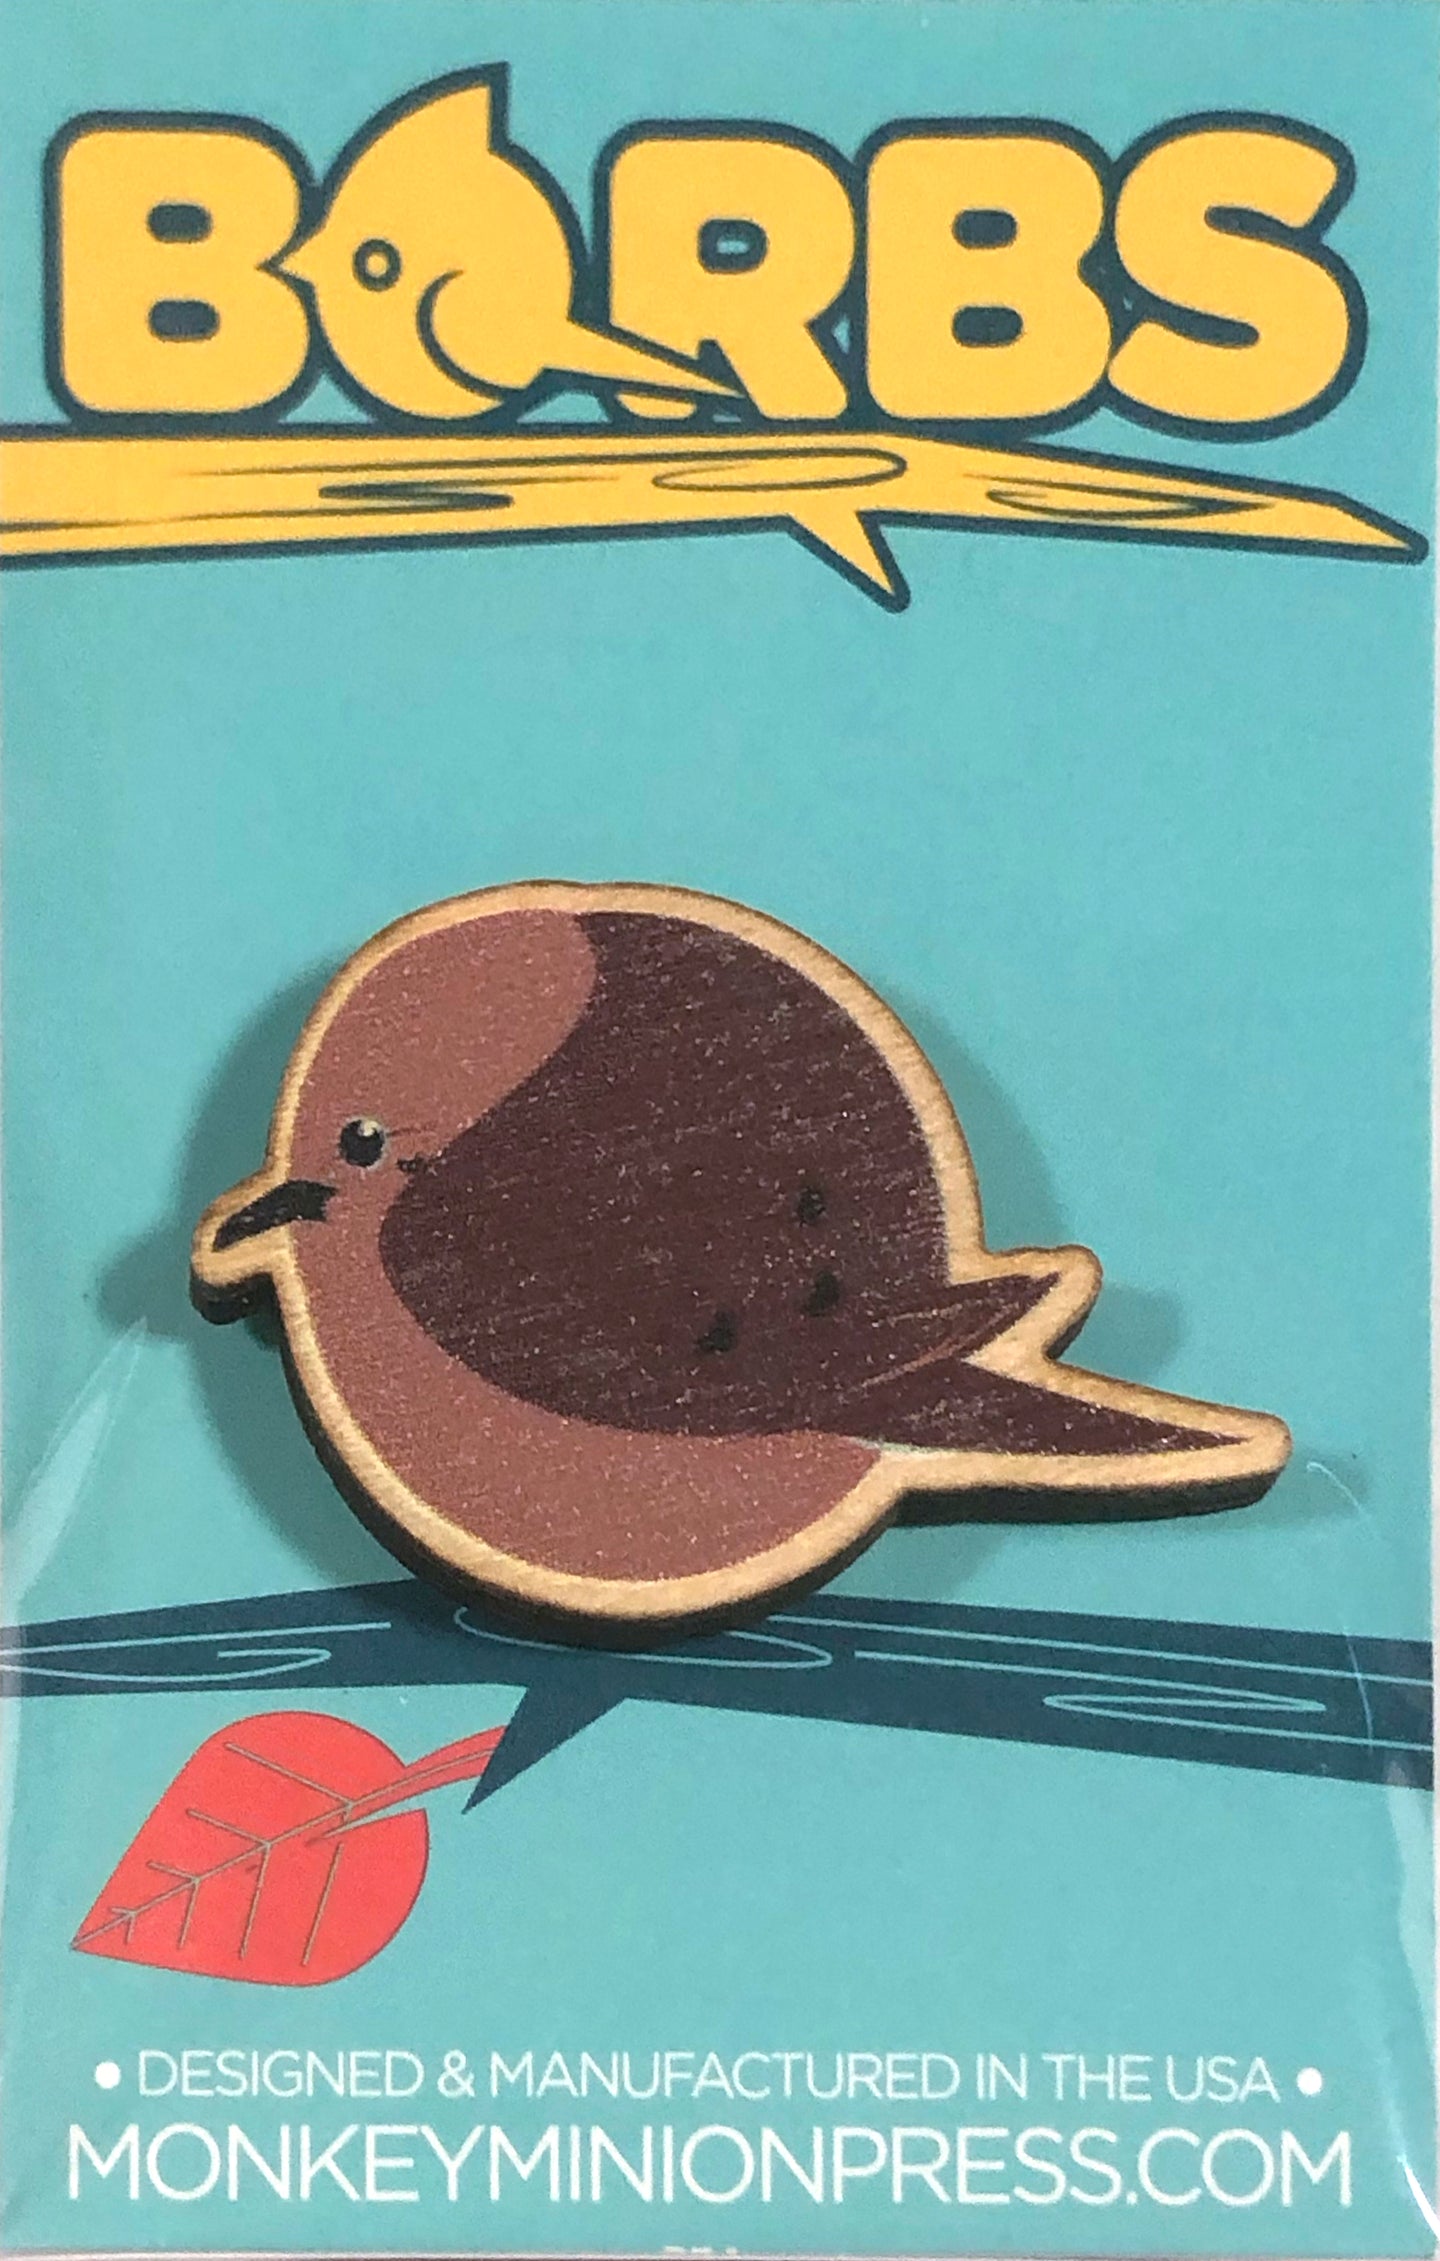 BORBS Mourning Dove Wooden Pin